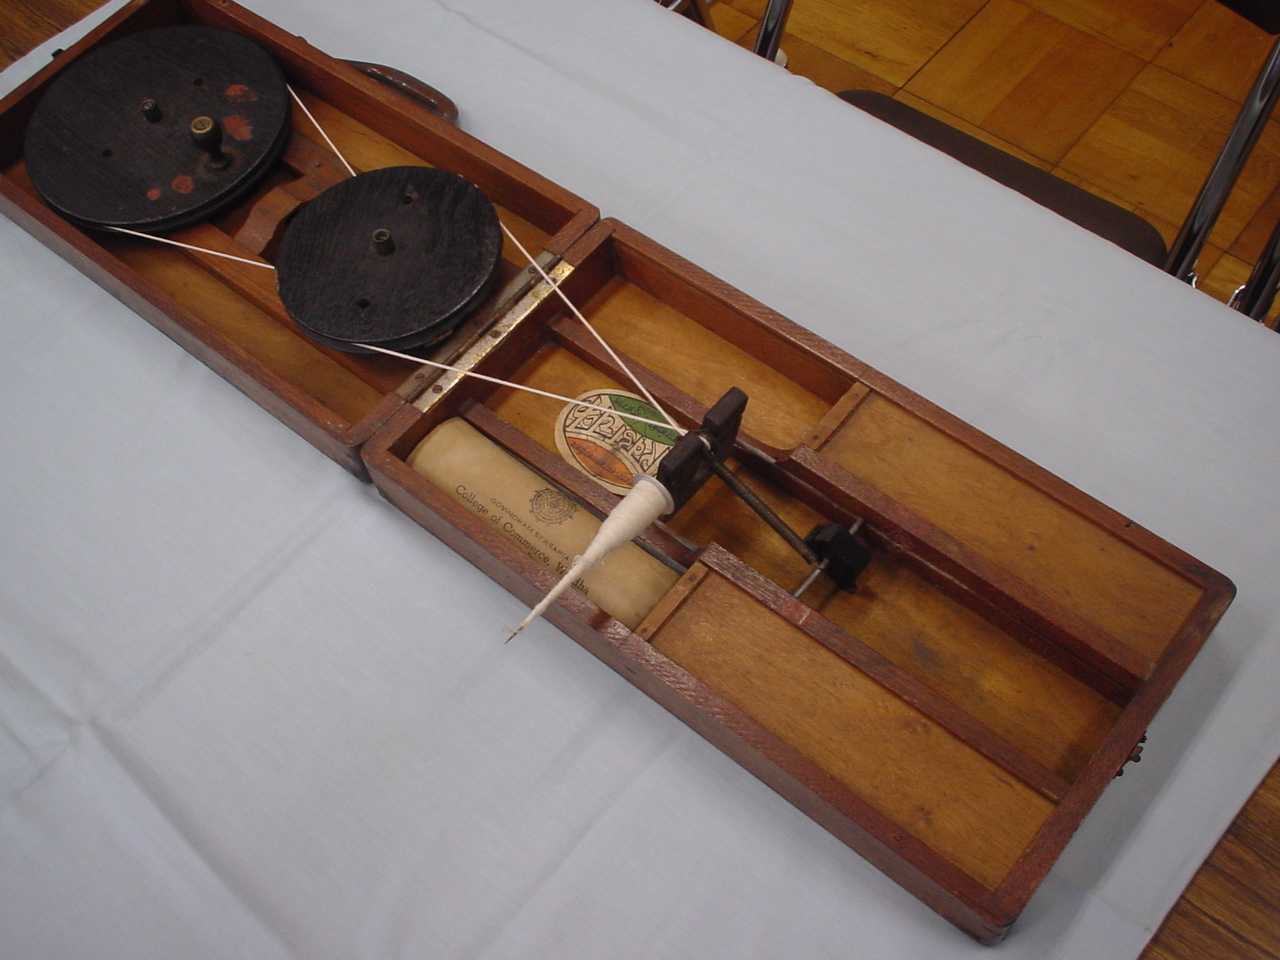 The charkha, specimen of the 'tabletop' or 'floor' type